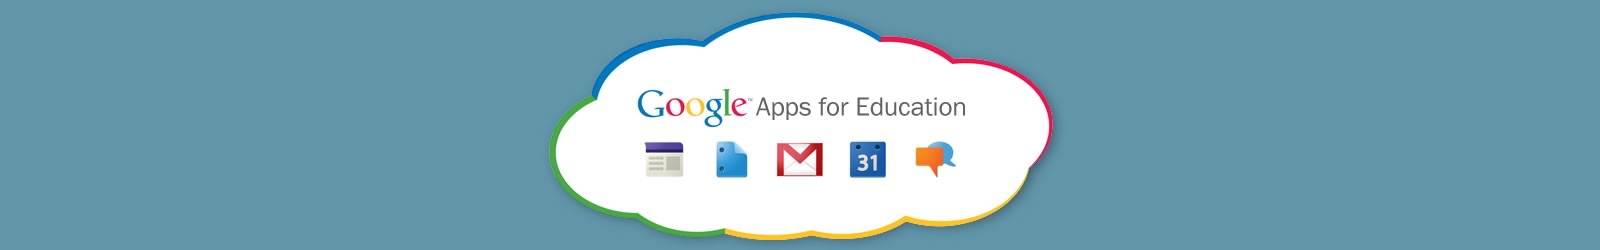 Learning3 Google Apps for Education specialists